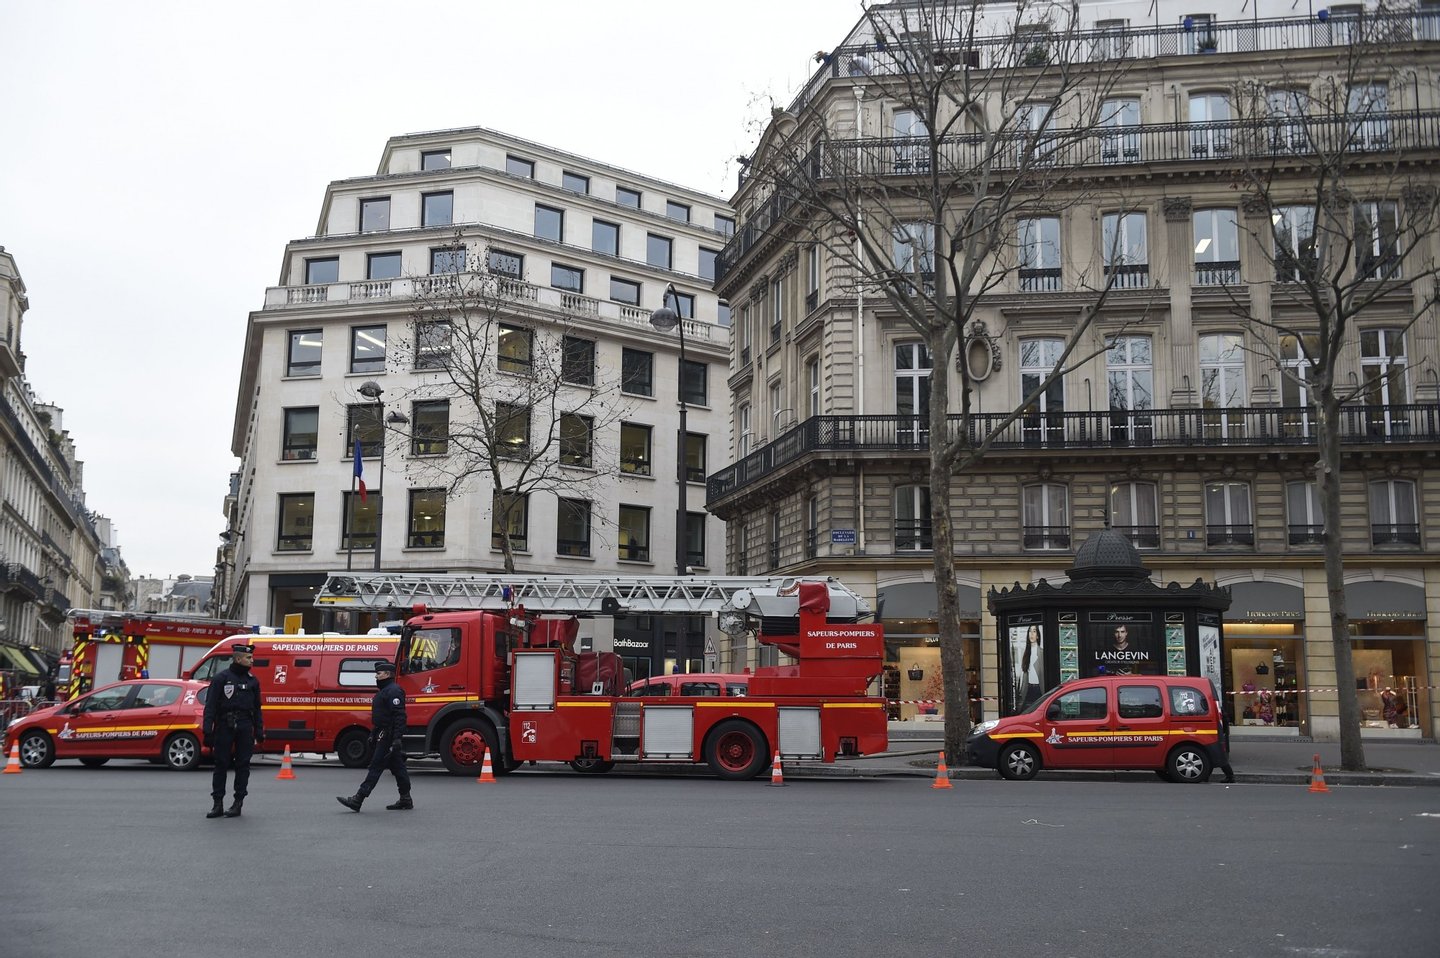 French police officers stand guard next to fire trucks parked near the Ritz Hotel in Paris after a fire broke out at the landmark hotel on January 19, 2016. A major fire broke out at the landmark Paris Ritz hotel, which is closed for renovations, the fire service said. The blaze is on the "top floor of the building and the roof", a fire service spokesman said. AFP PHOTO / LIONEL BONAVENTURE / AFP / LIONEL BONAVENTURE (Photo credit should read LIONEL BONAVENTURE/AFP/Getty Images)